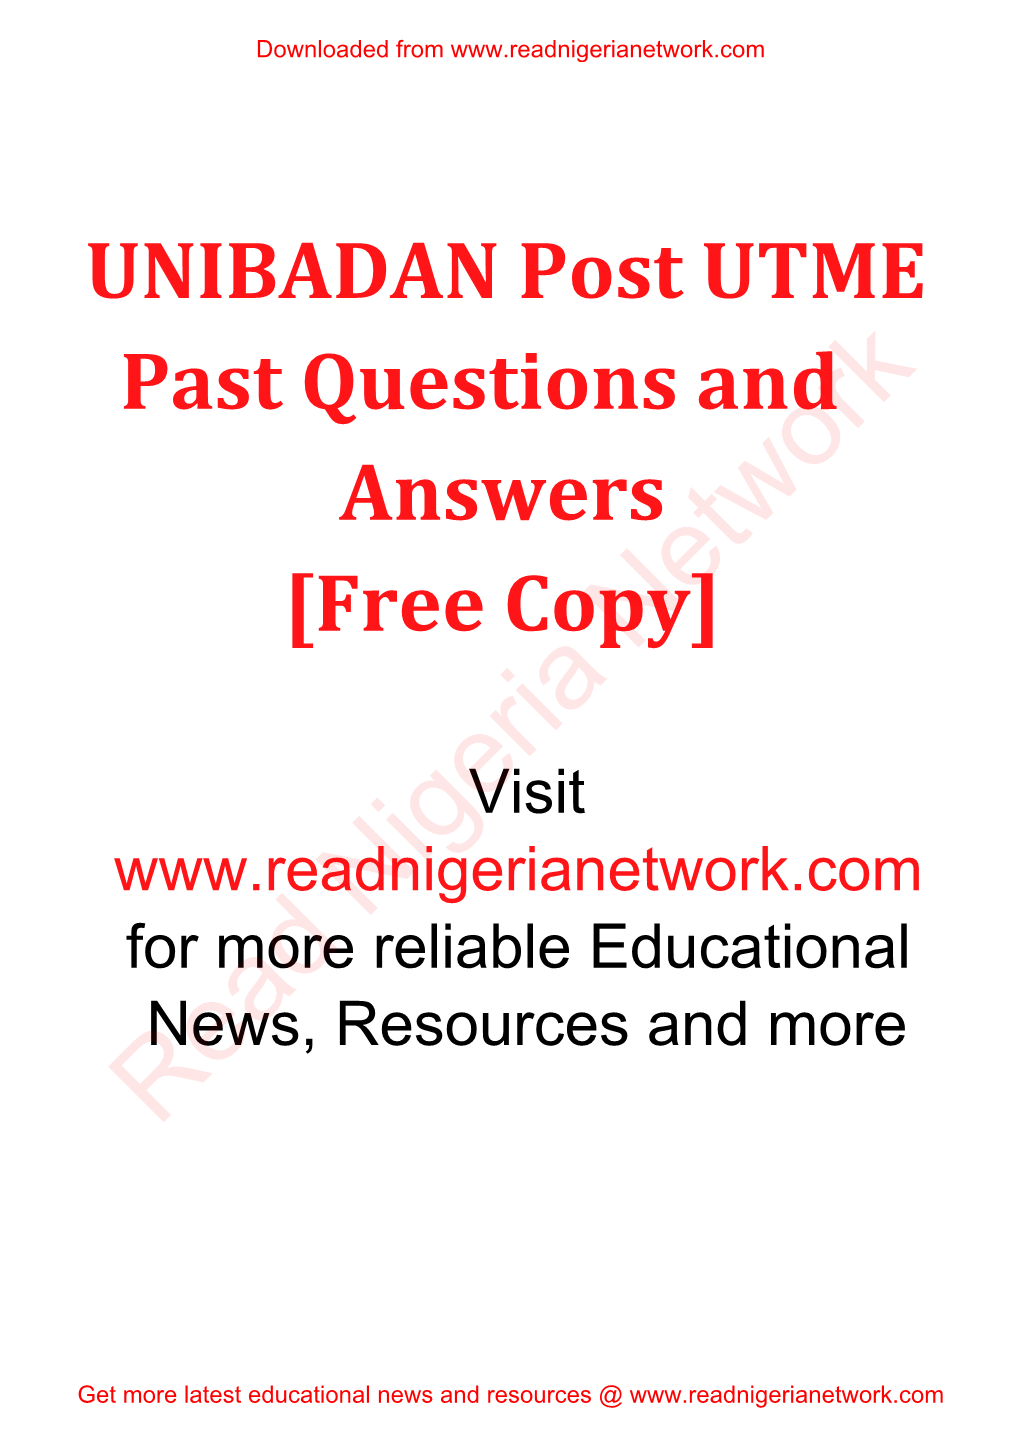 Answers Past Questions and UNIBADAN